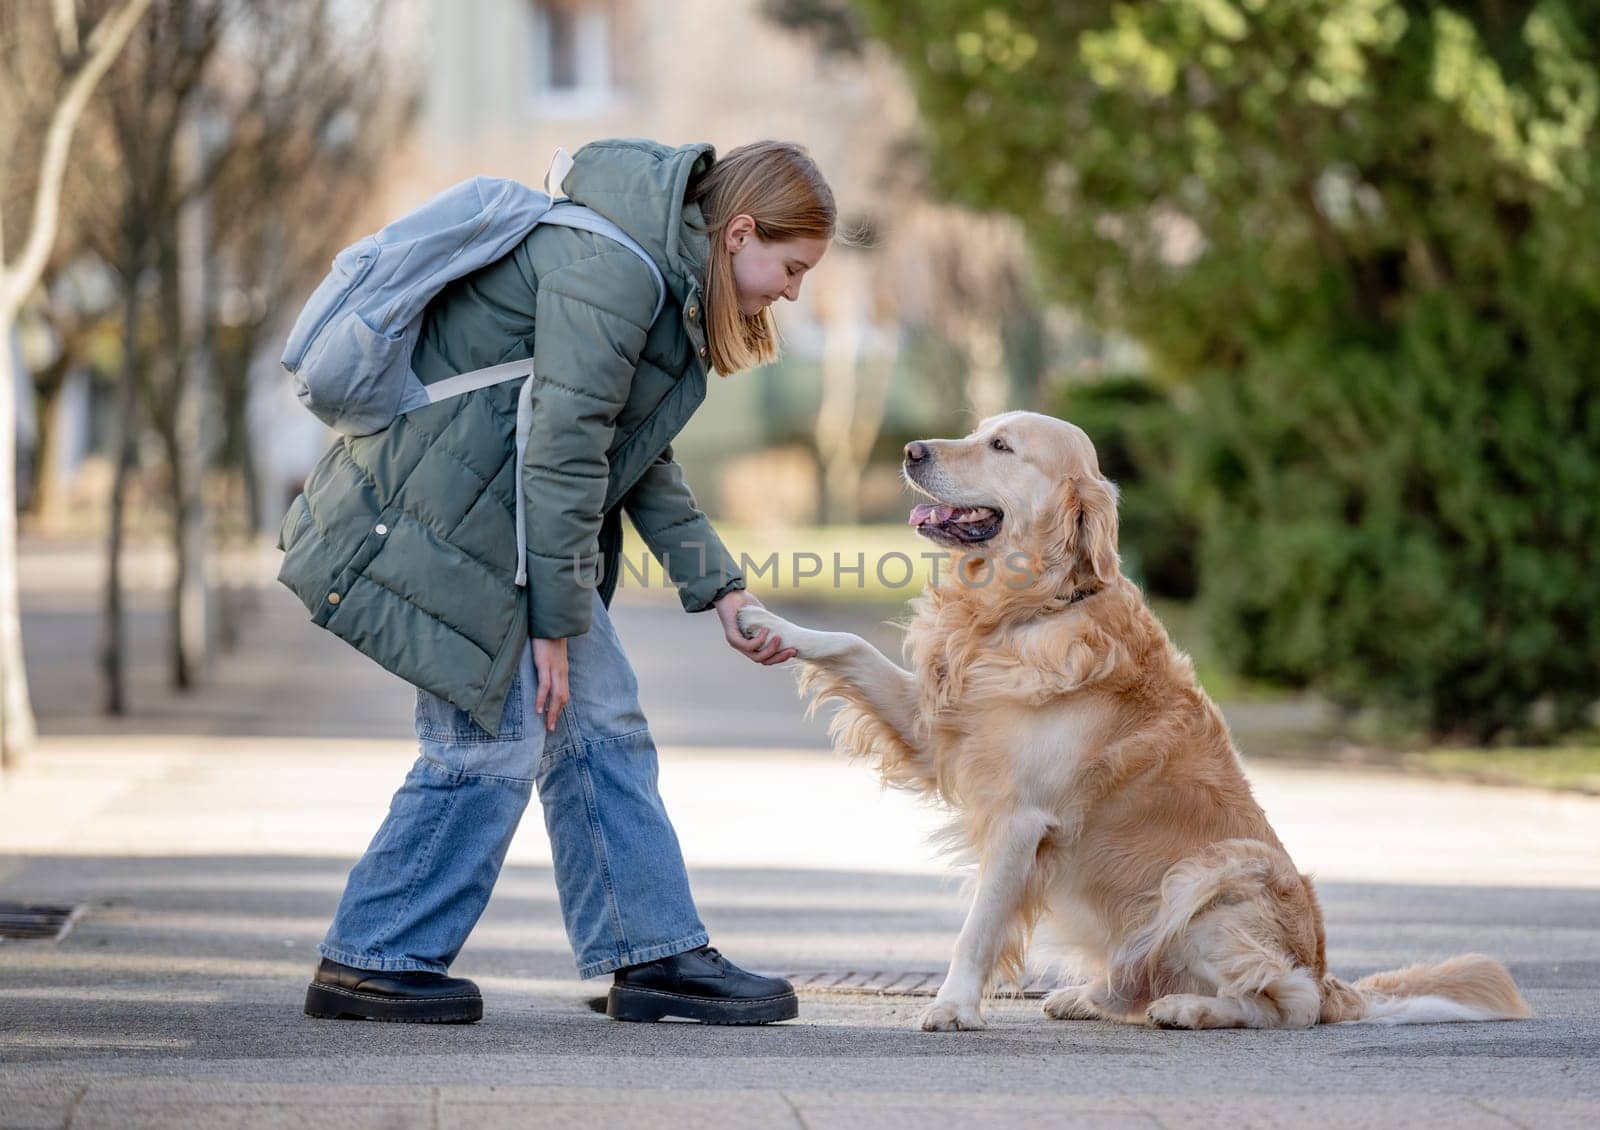 Golden Retriever Gives Paw To Its Little Girl Owner by tan4ikk1